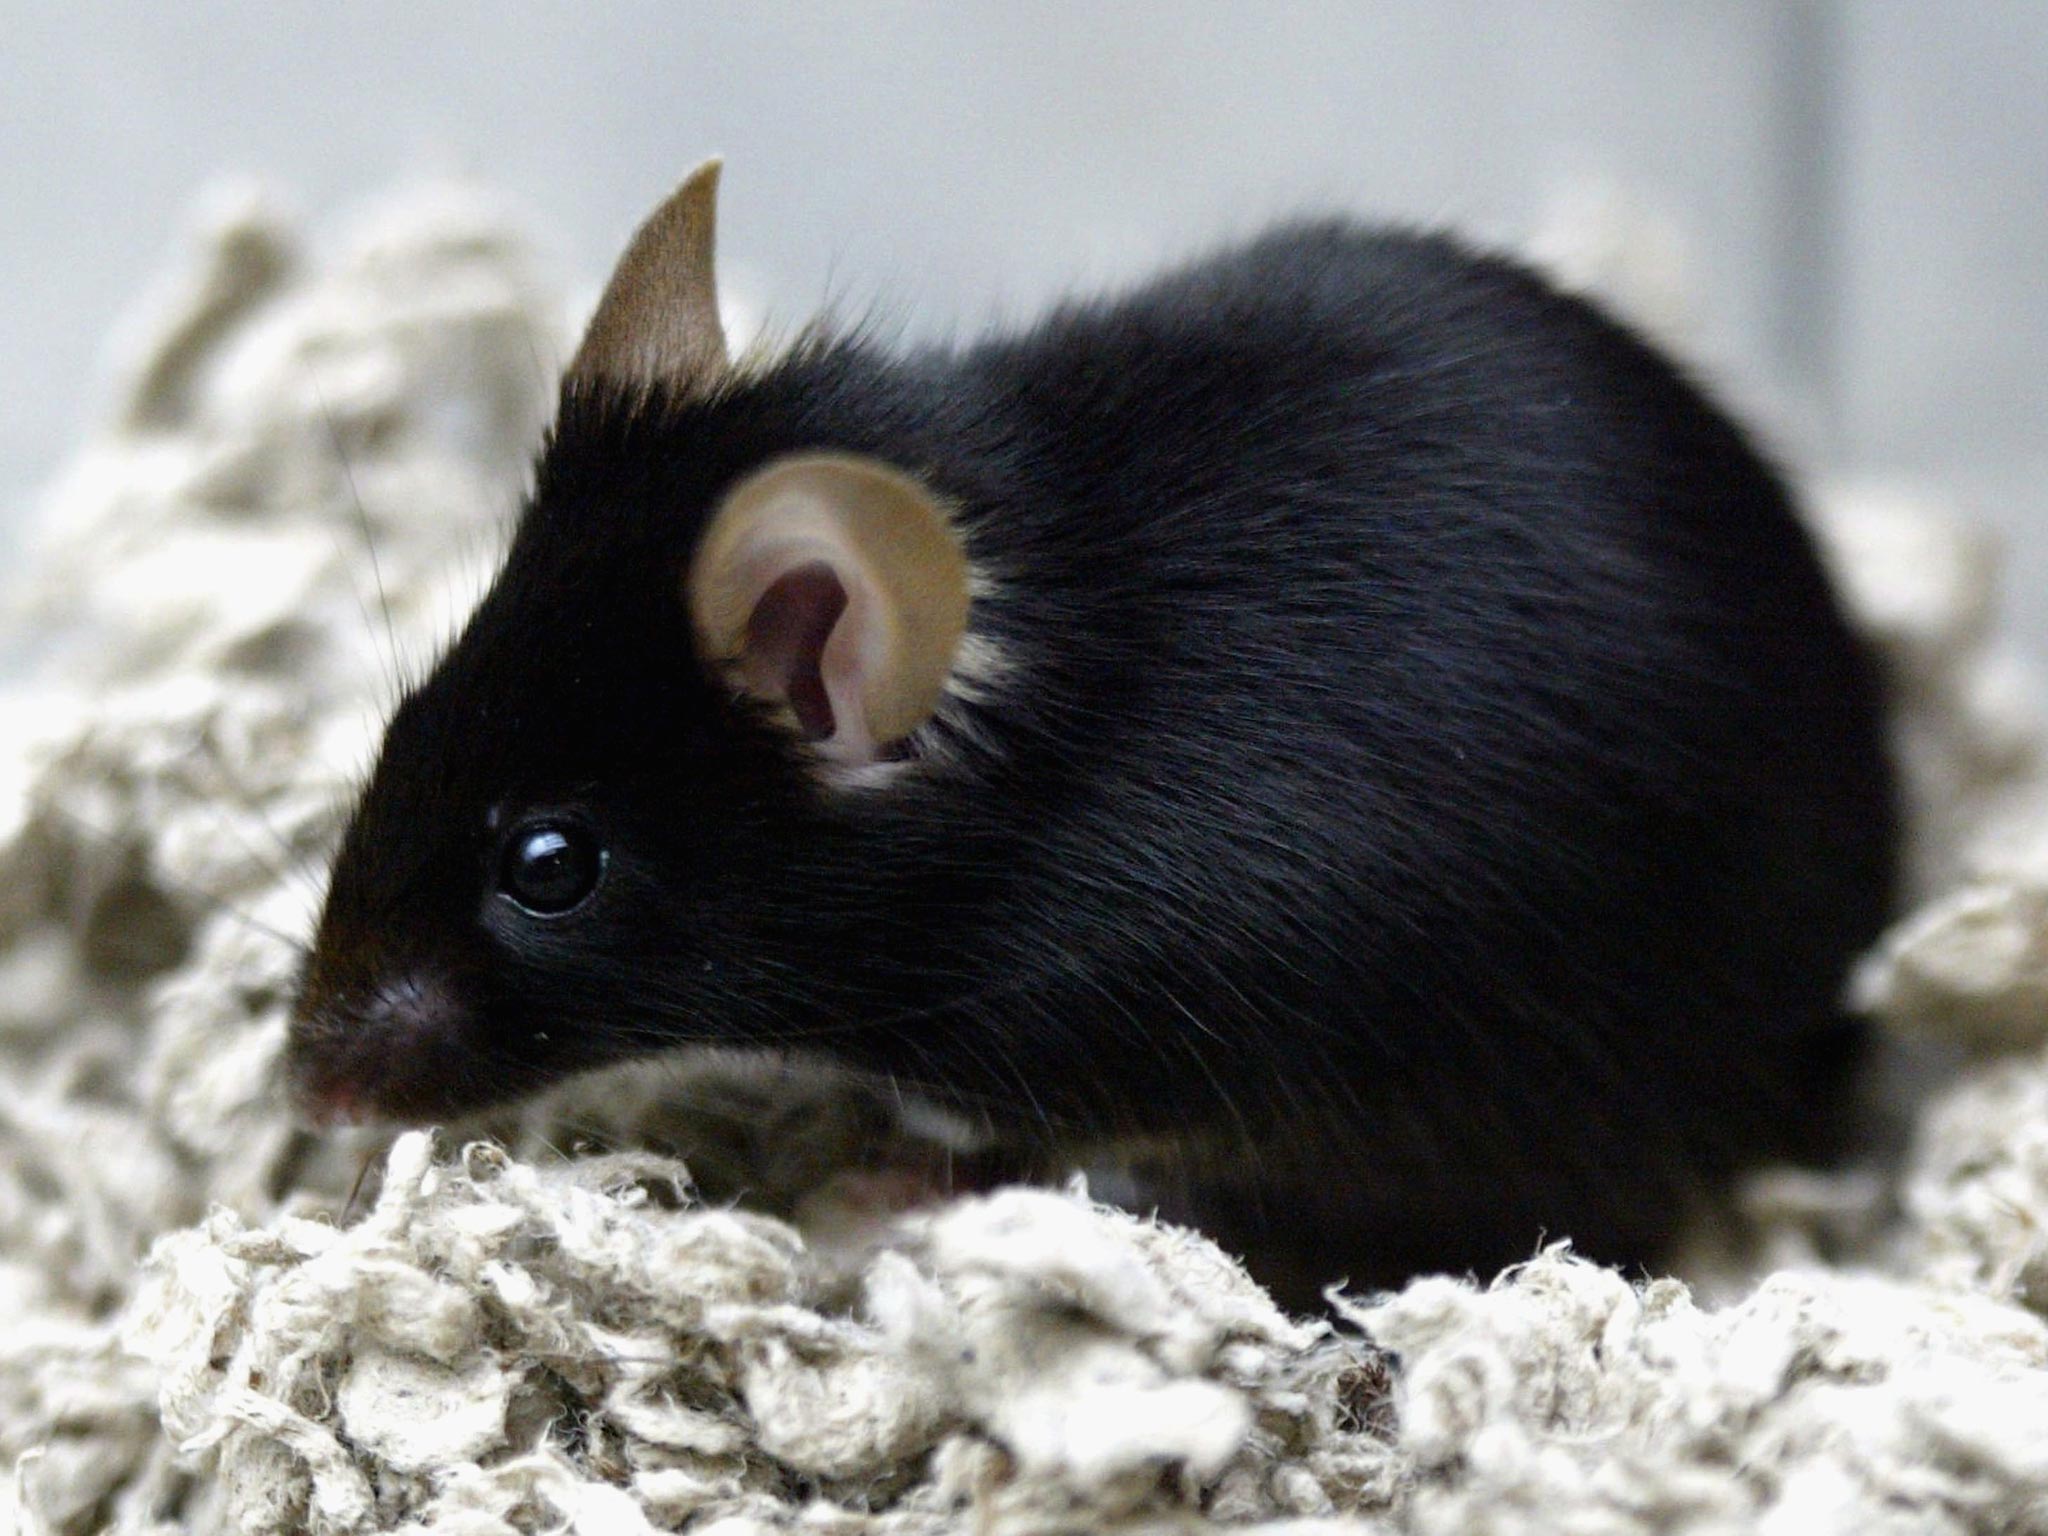 Within 10 to 14 days, the mice had regained motor skills and were able to walk again